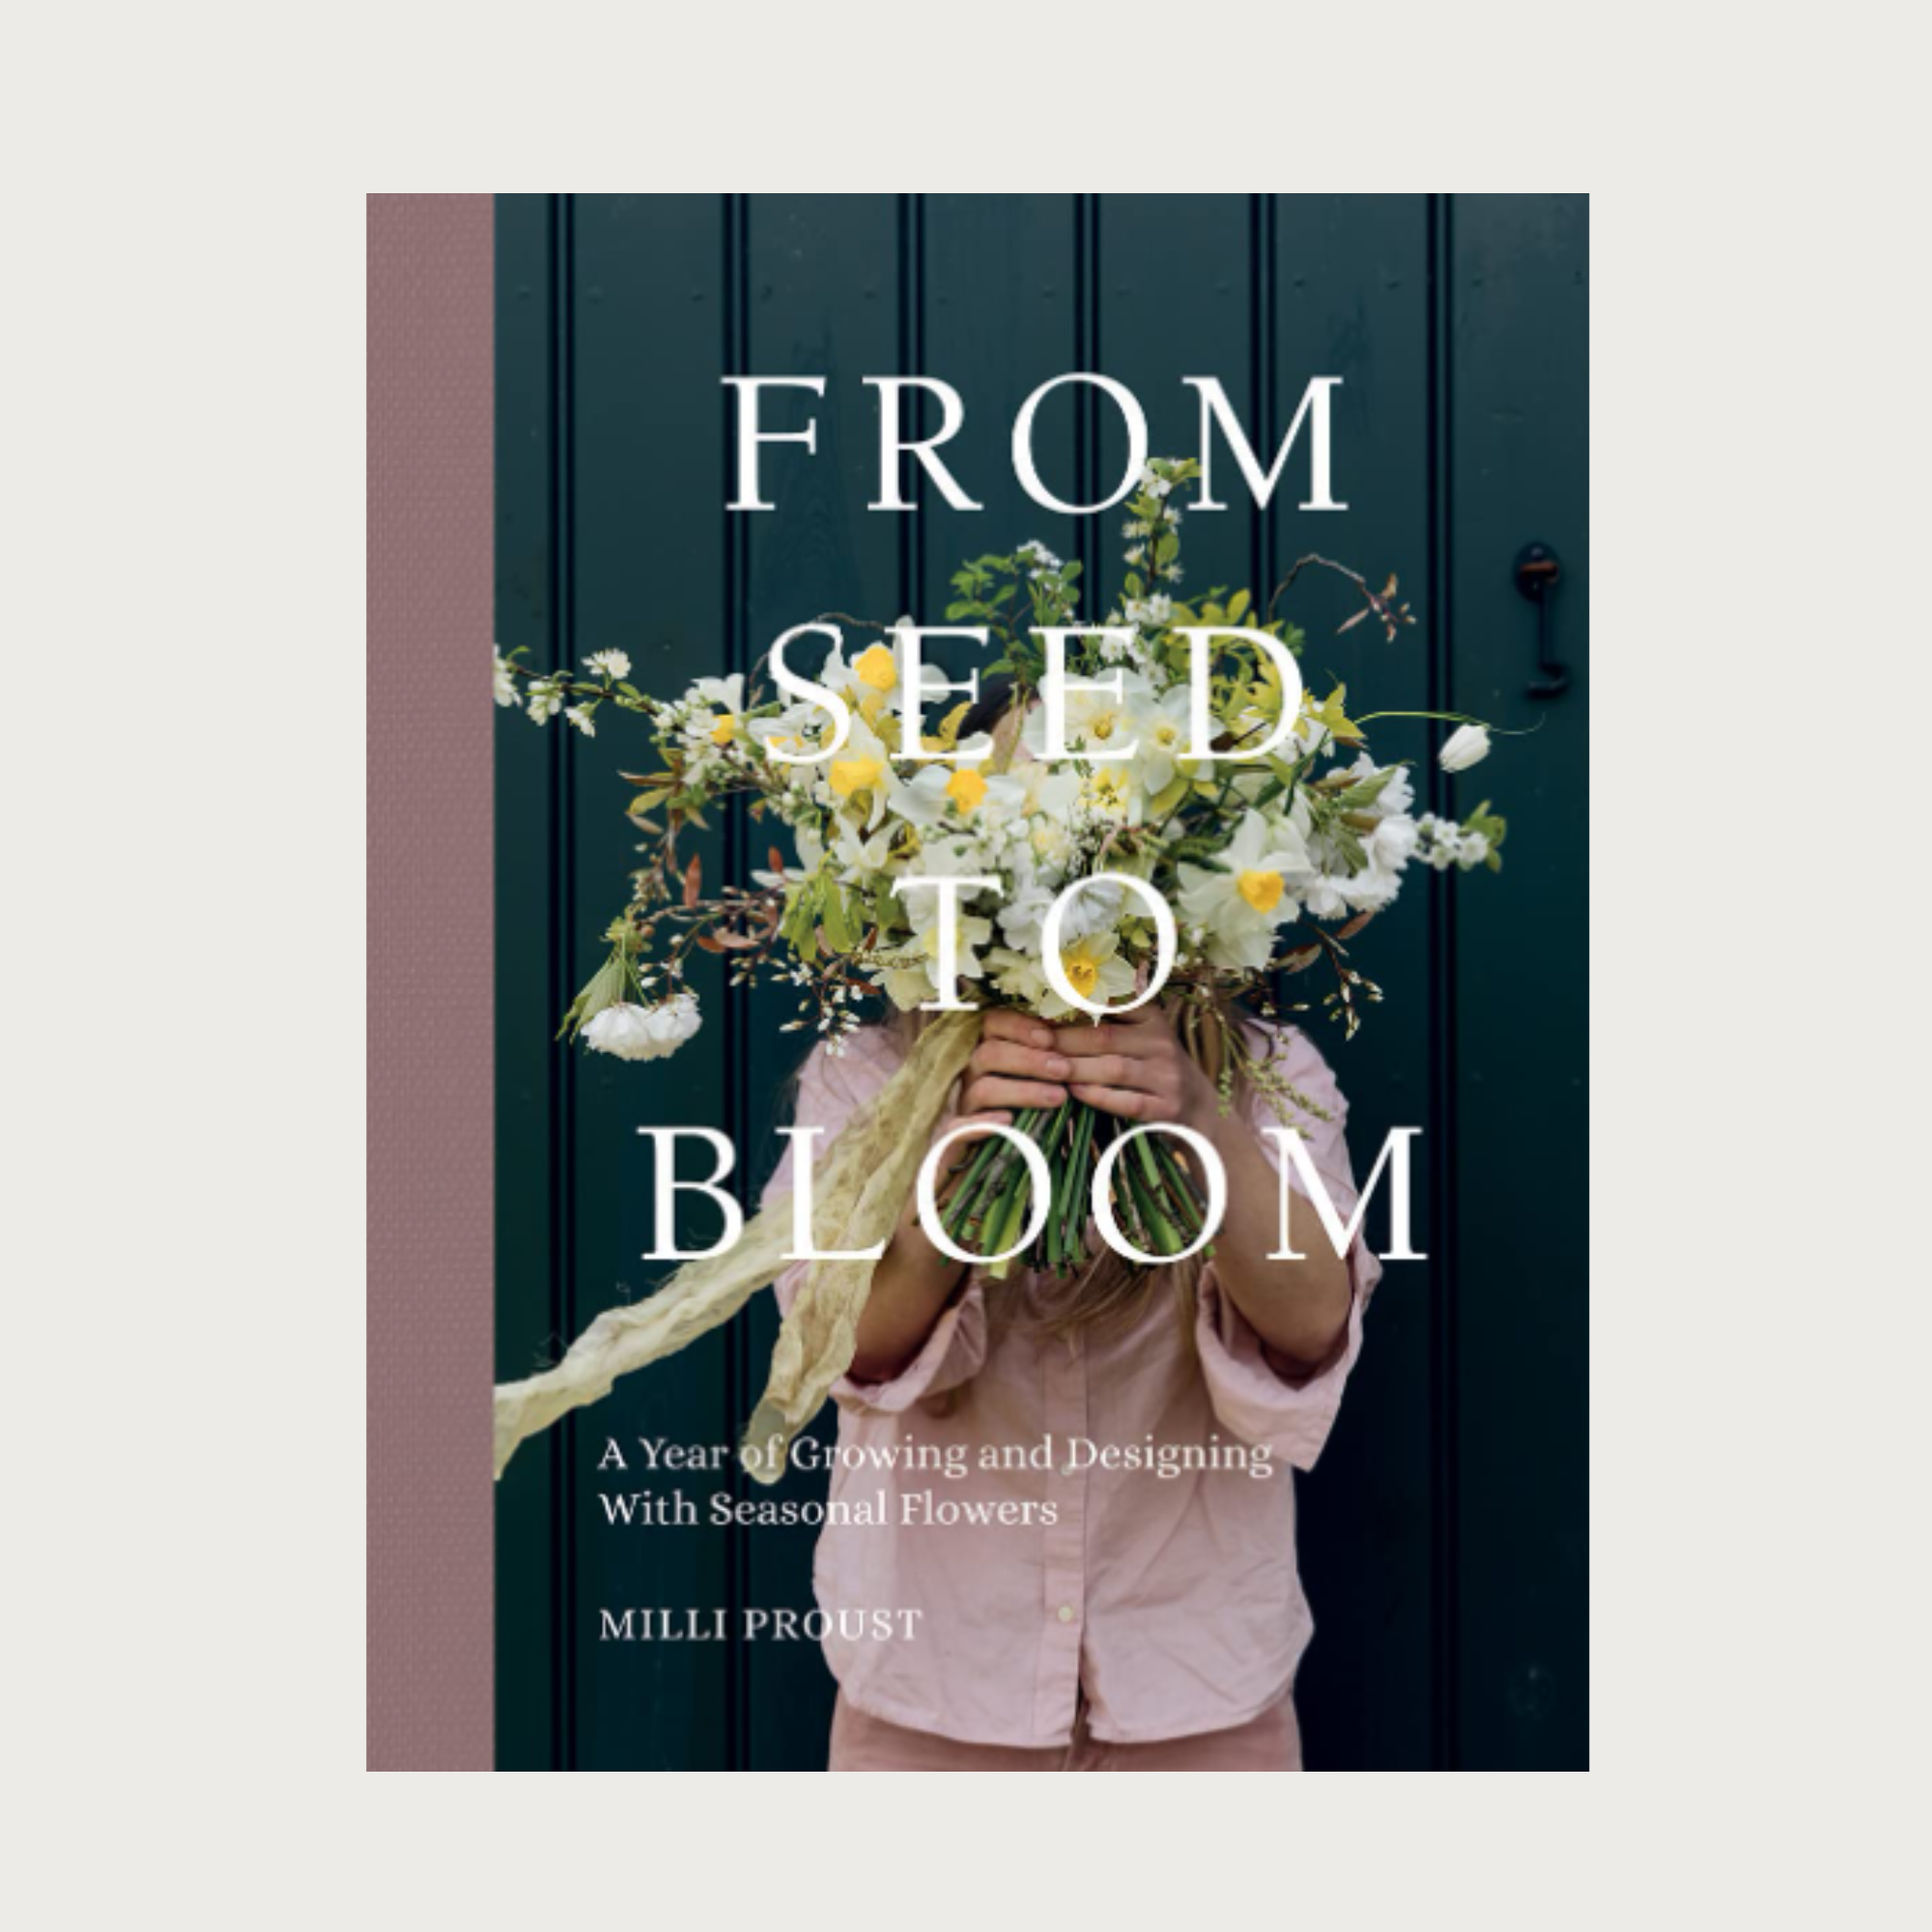 From Seed to Bloom book by Milli Proust front cover